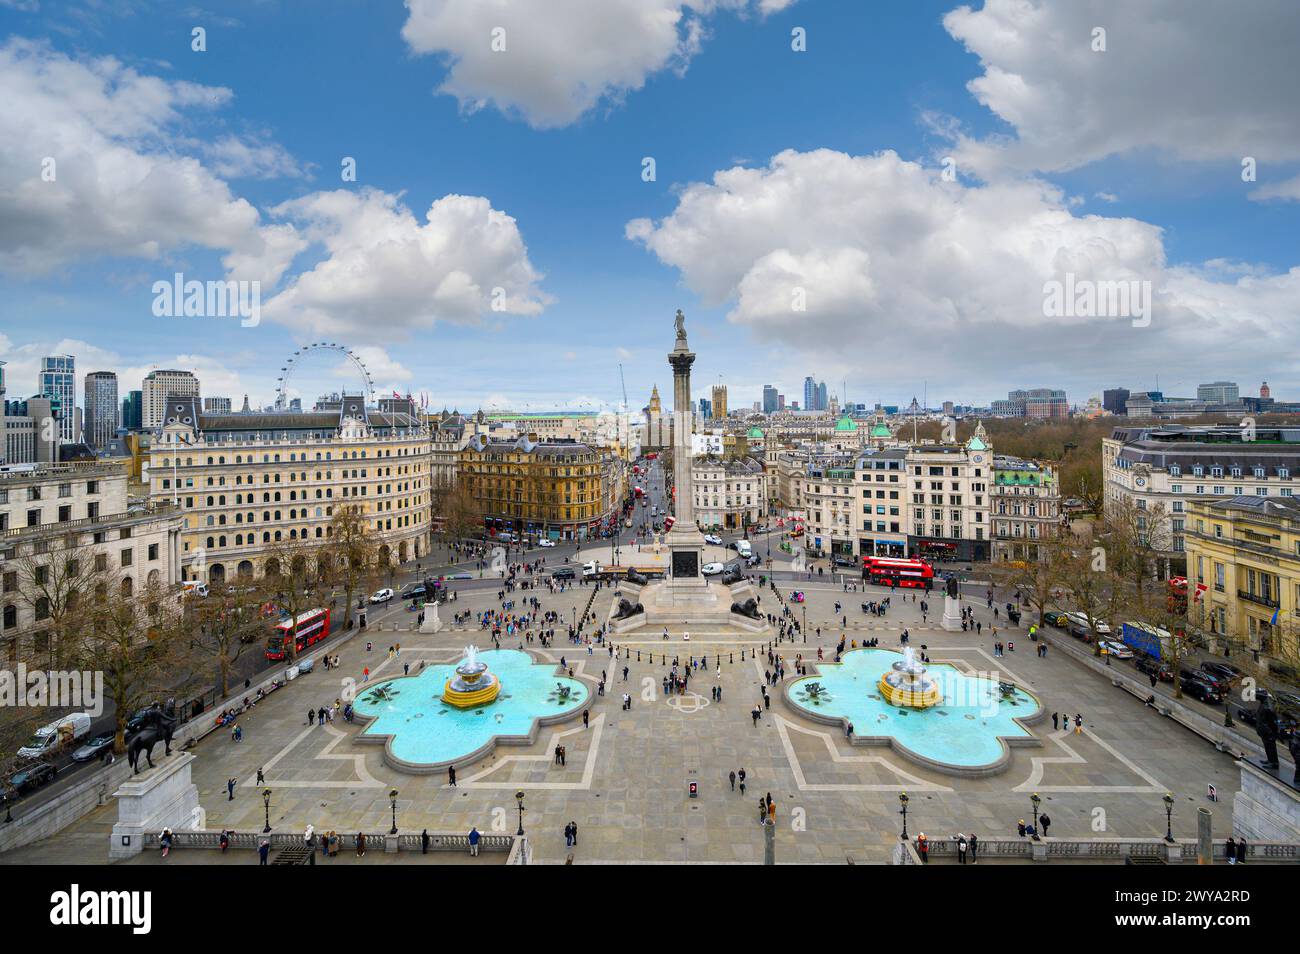 Bird's eye view of London's famous Trafalgar Square from the National Gallery, London, England. Stock Photo